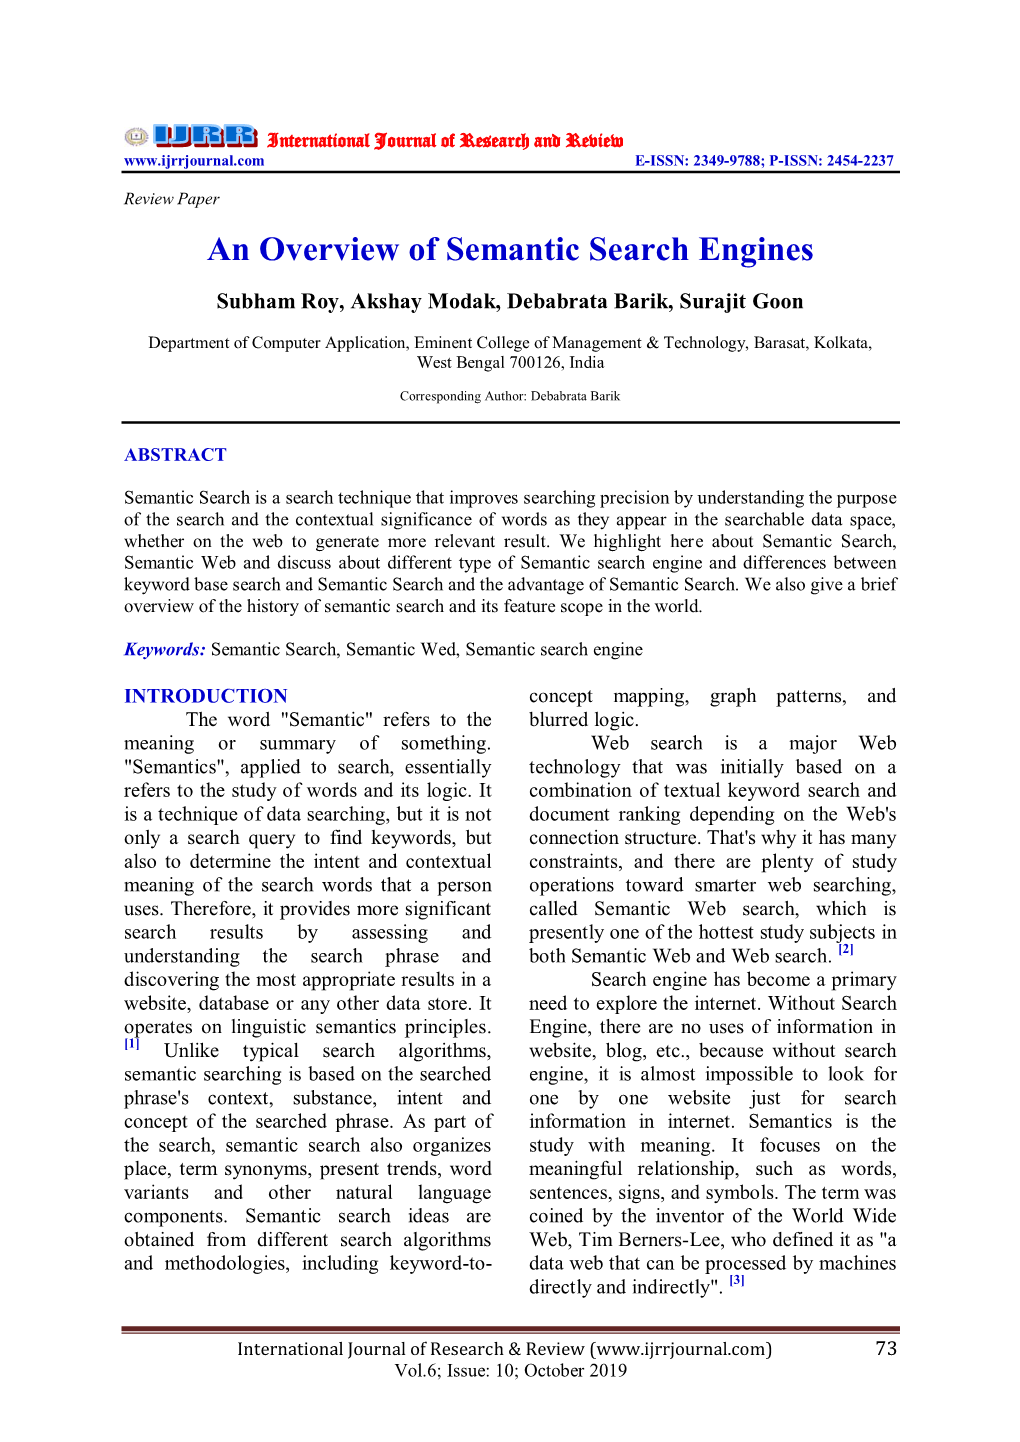 An Overview of Semantic Search Engines